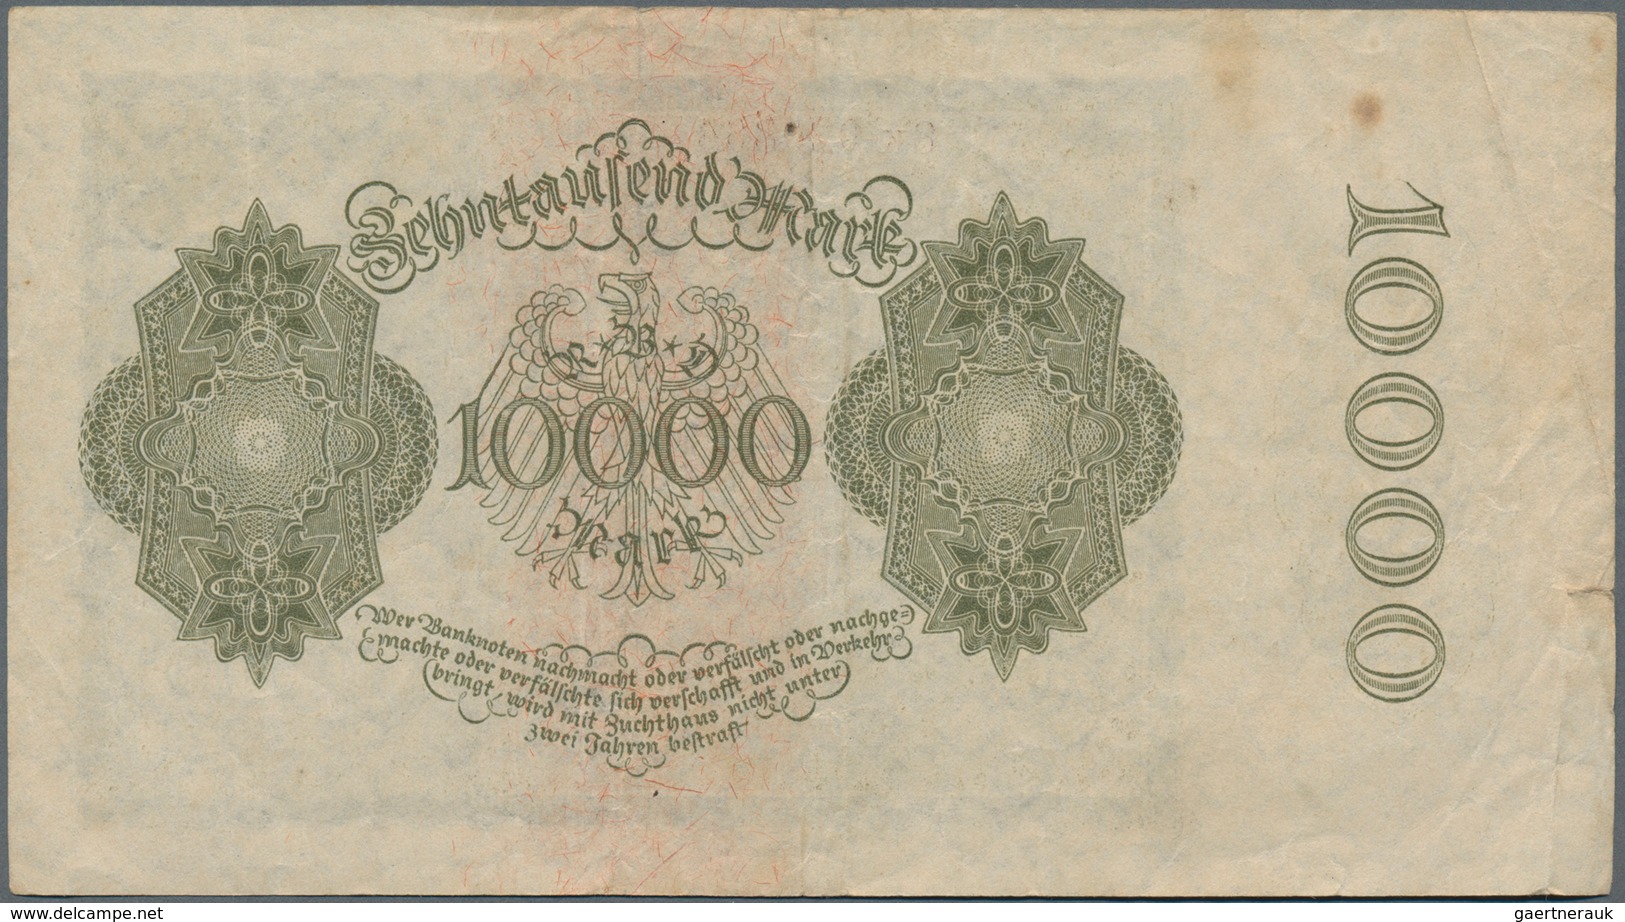 Alle Welt: Box with about 1100 banknotes, mainly cheap notes from all over the world including some